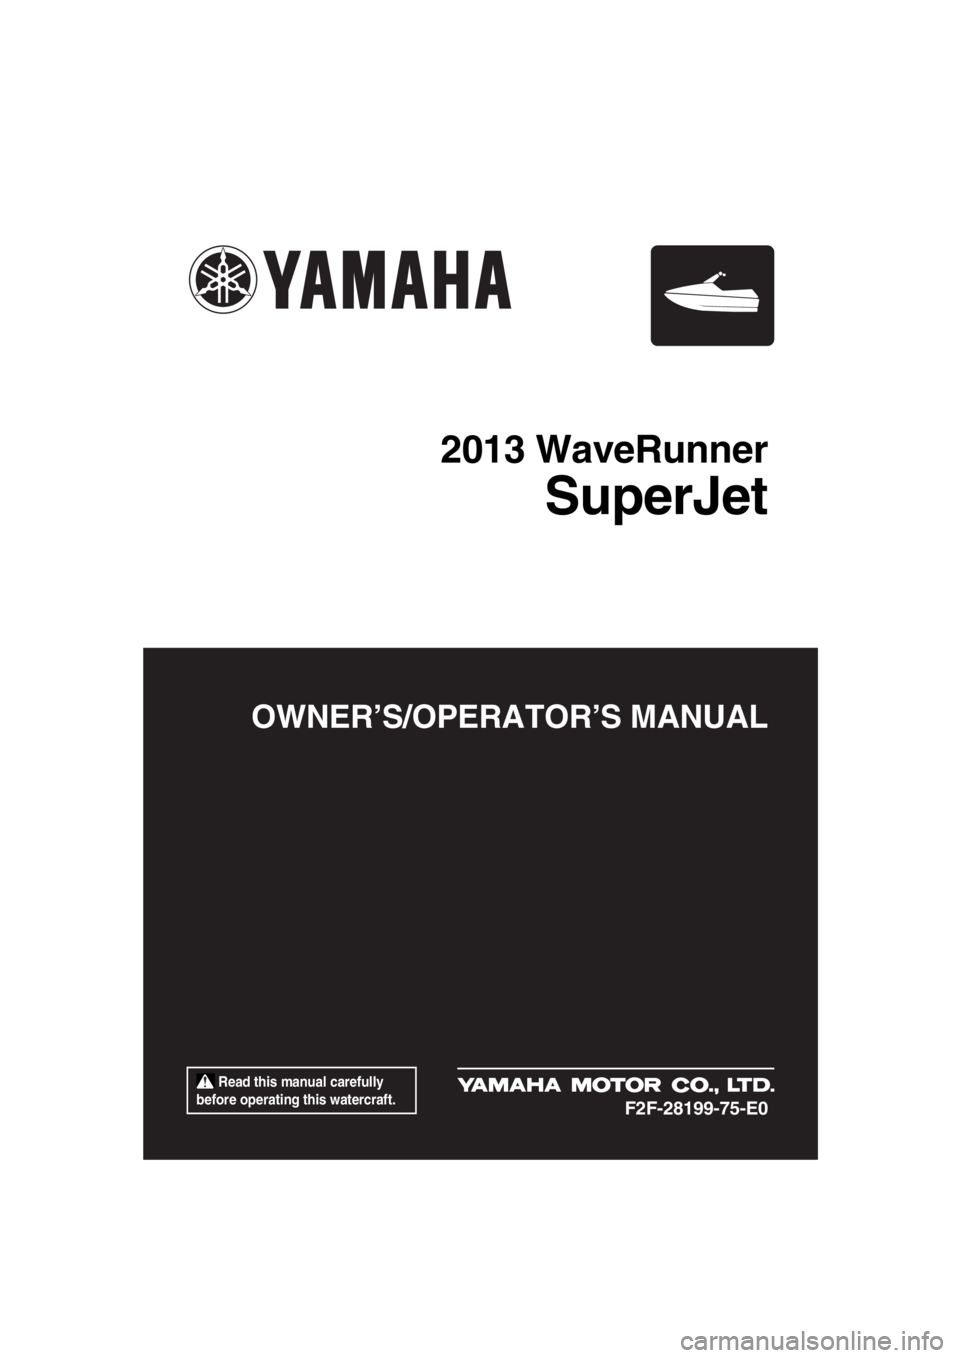 YAMAHA SUPERJET 2013  Owners Manual  Read this manual carefully 
before operating this watercraft.
OWNER’S/OPERATOR’S MANUAL
2013 WaveRunner
SuperJet
F2F-28199-75-E0
UF2F75E0.book  Page 1  Thursday, July 5, 2012  8:50 AM 